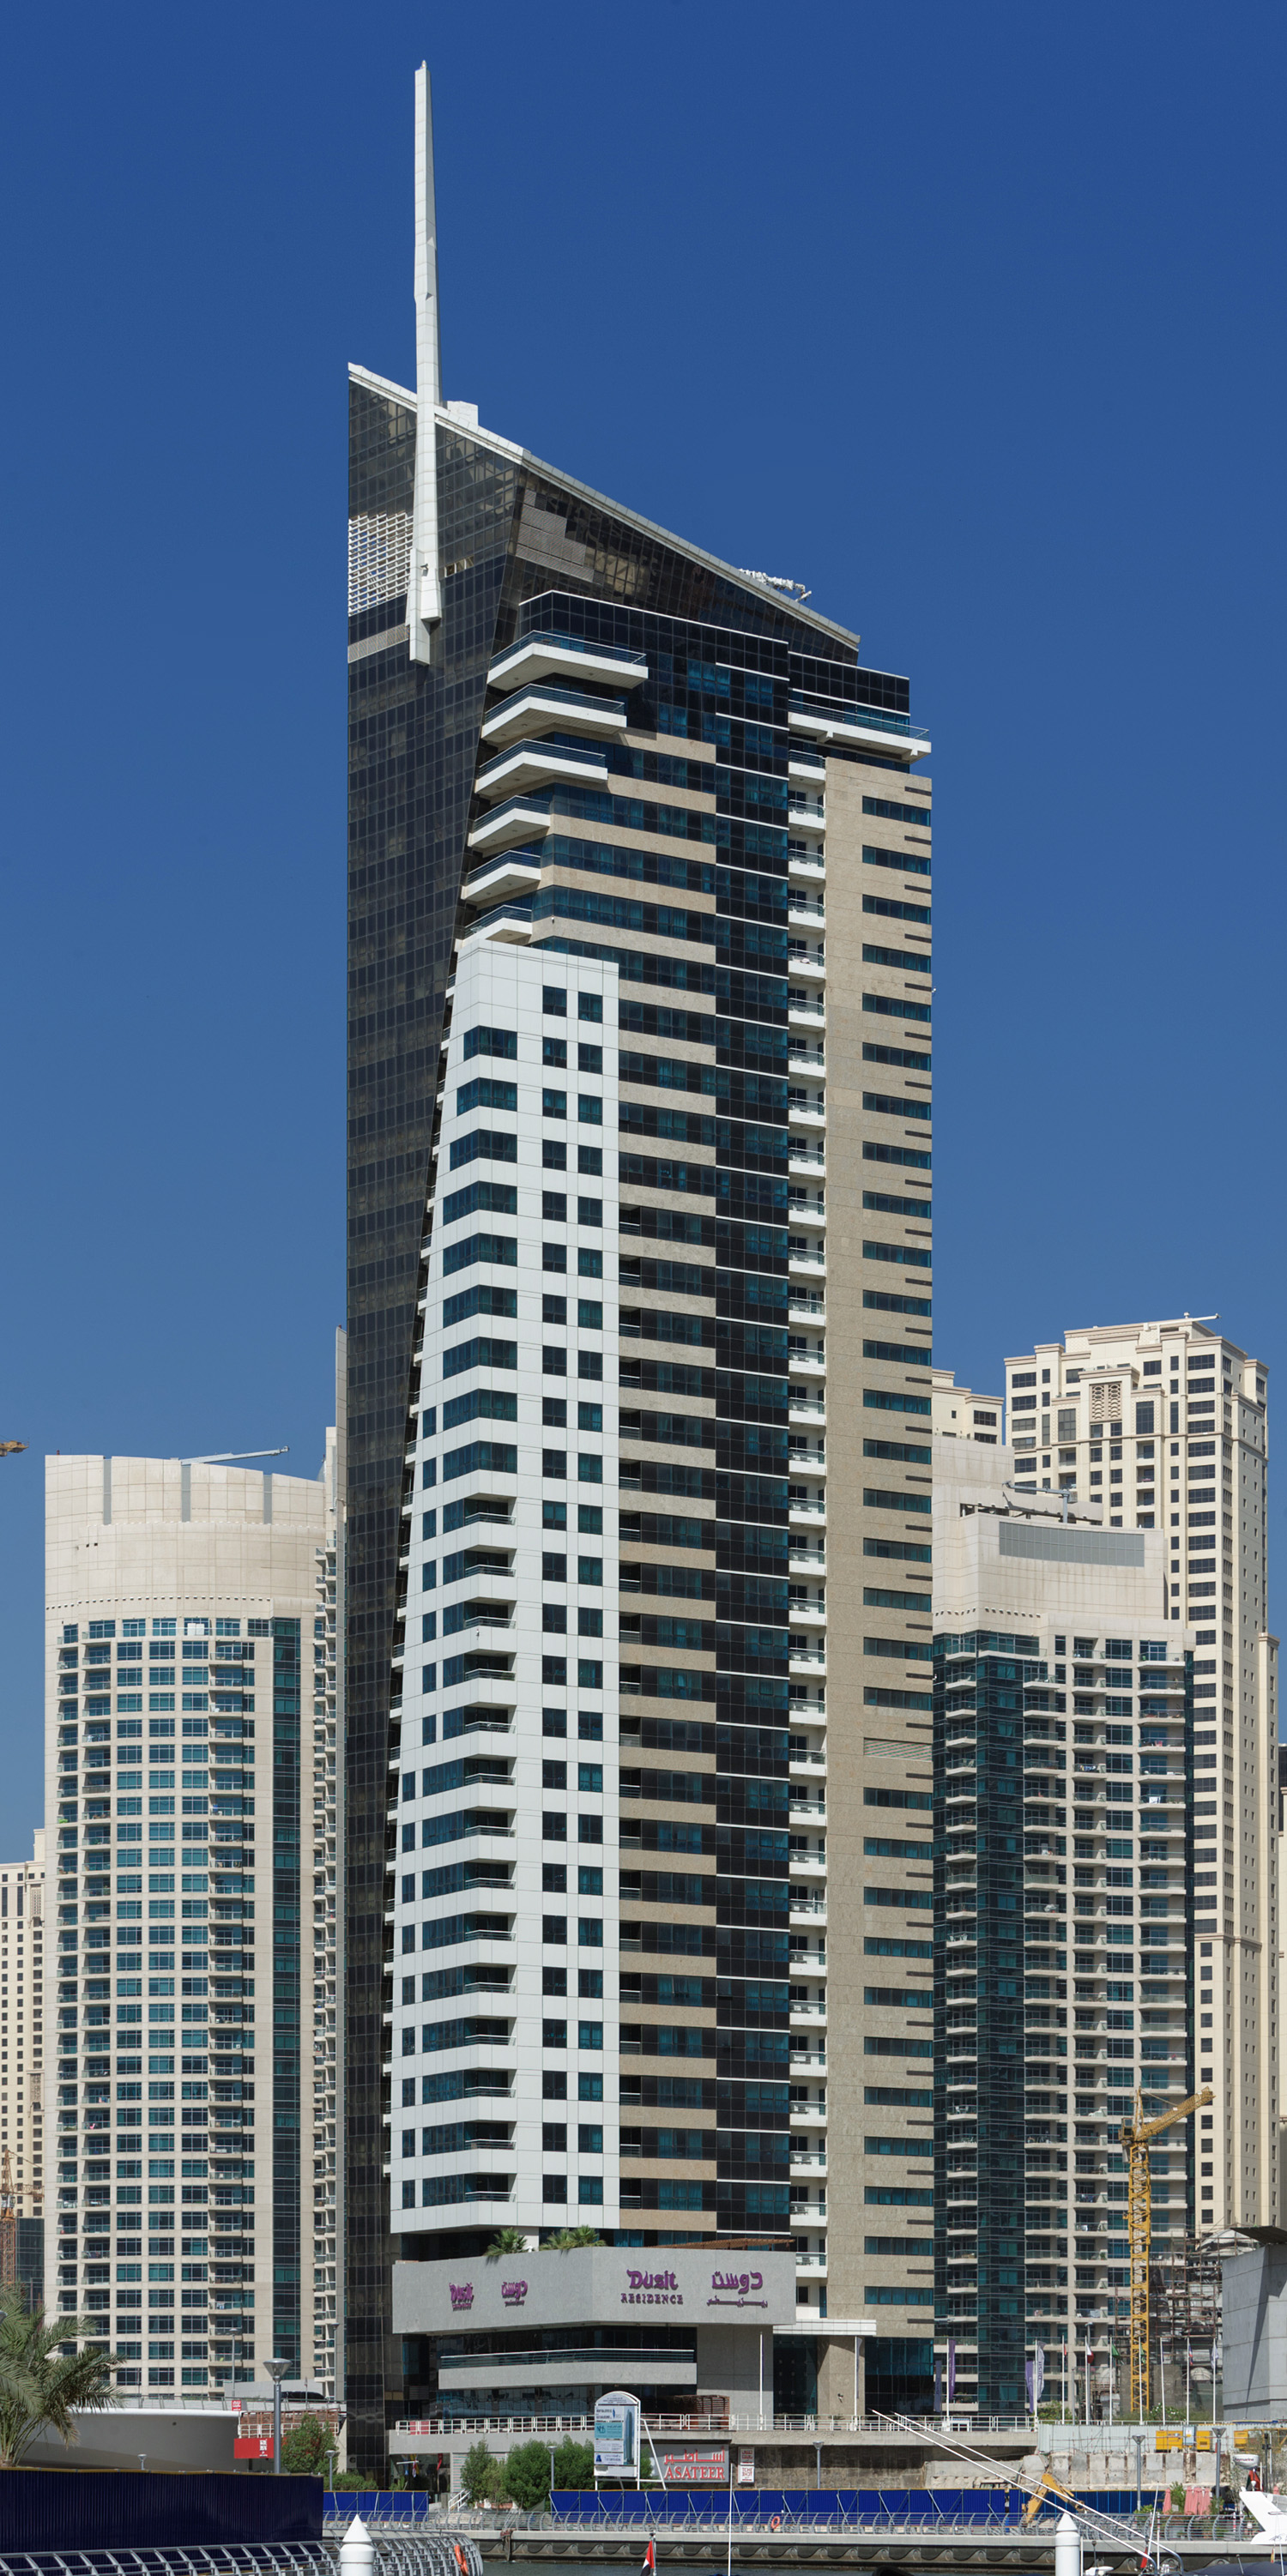 Dusit Residence, Dubai - View from the east. © Mathias Beinling